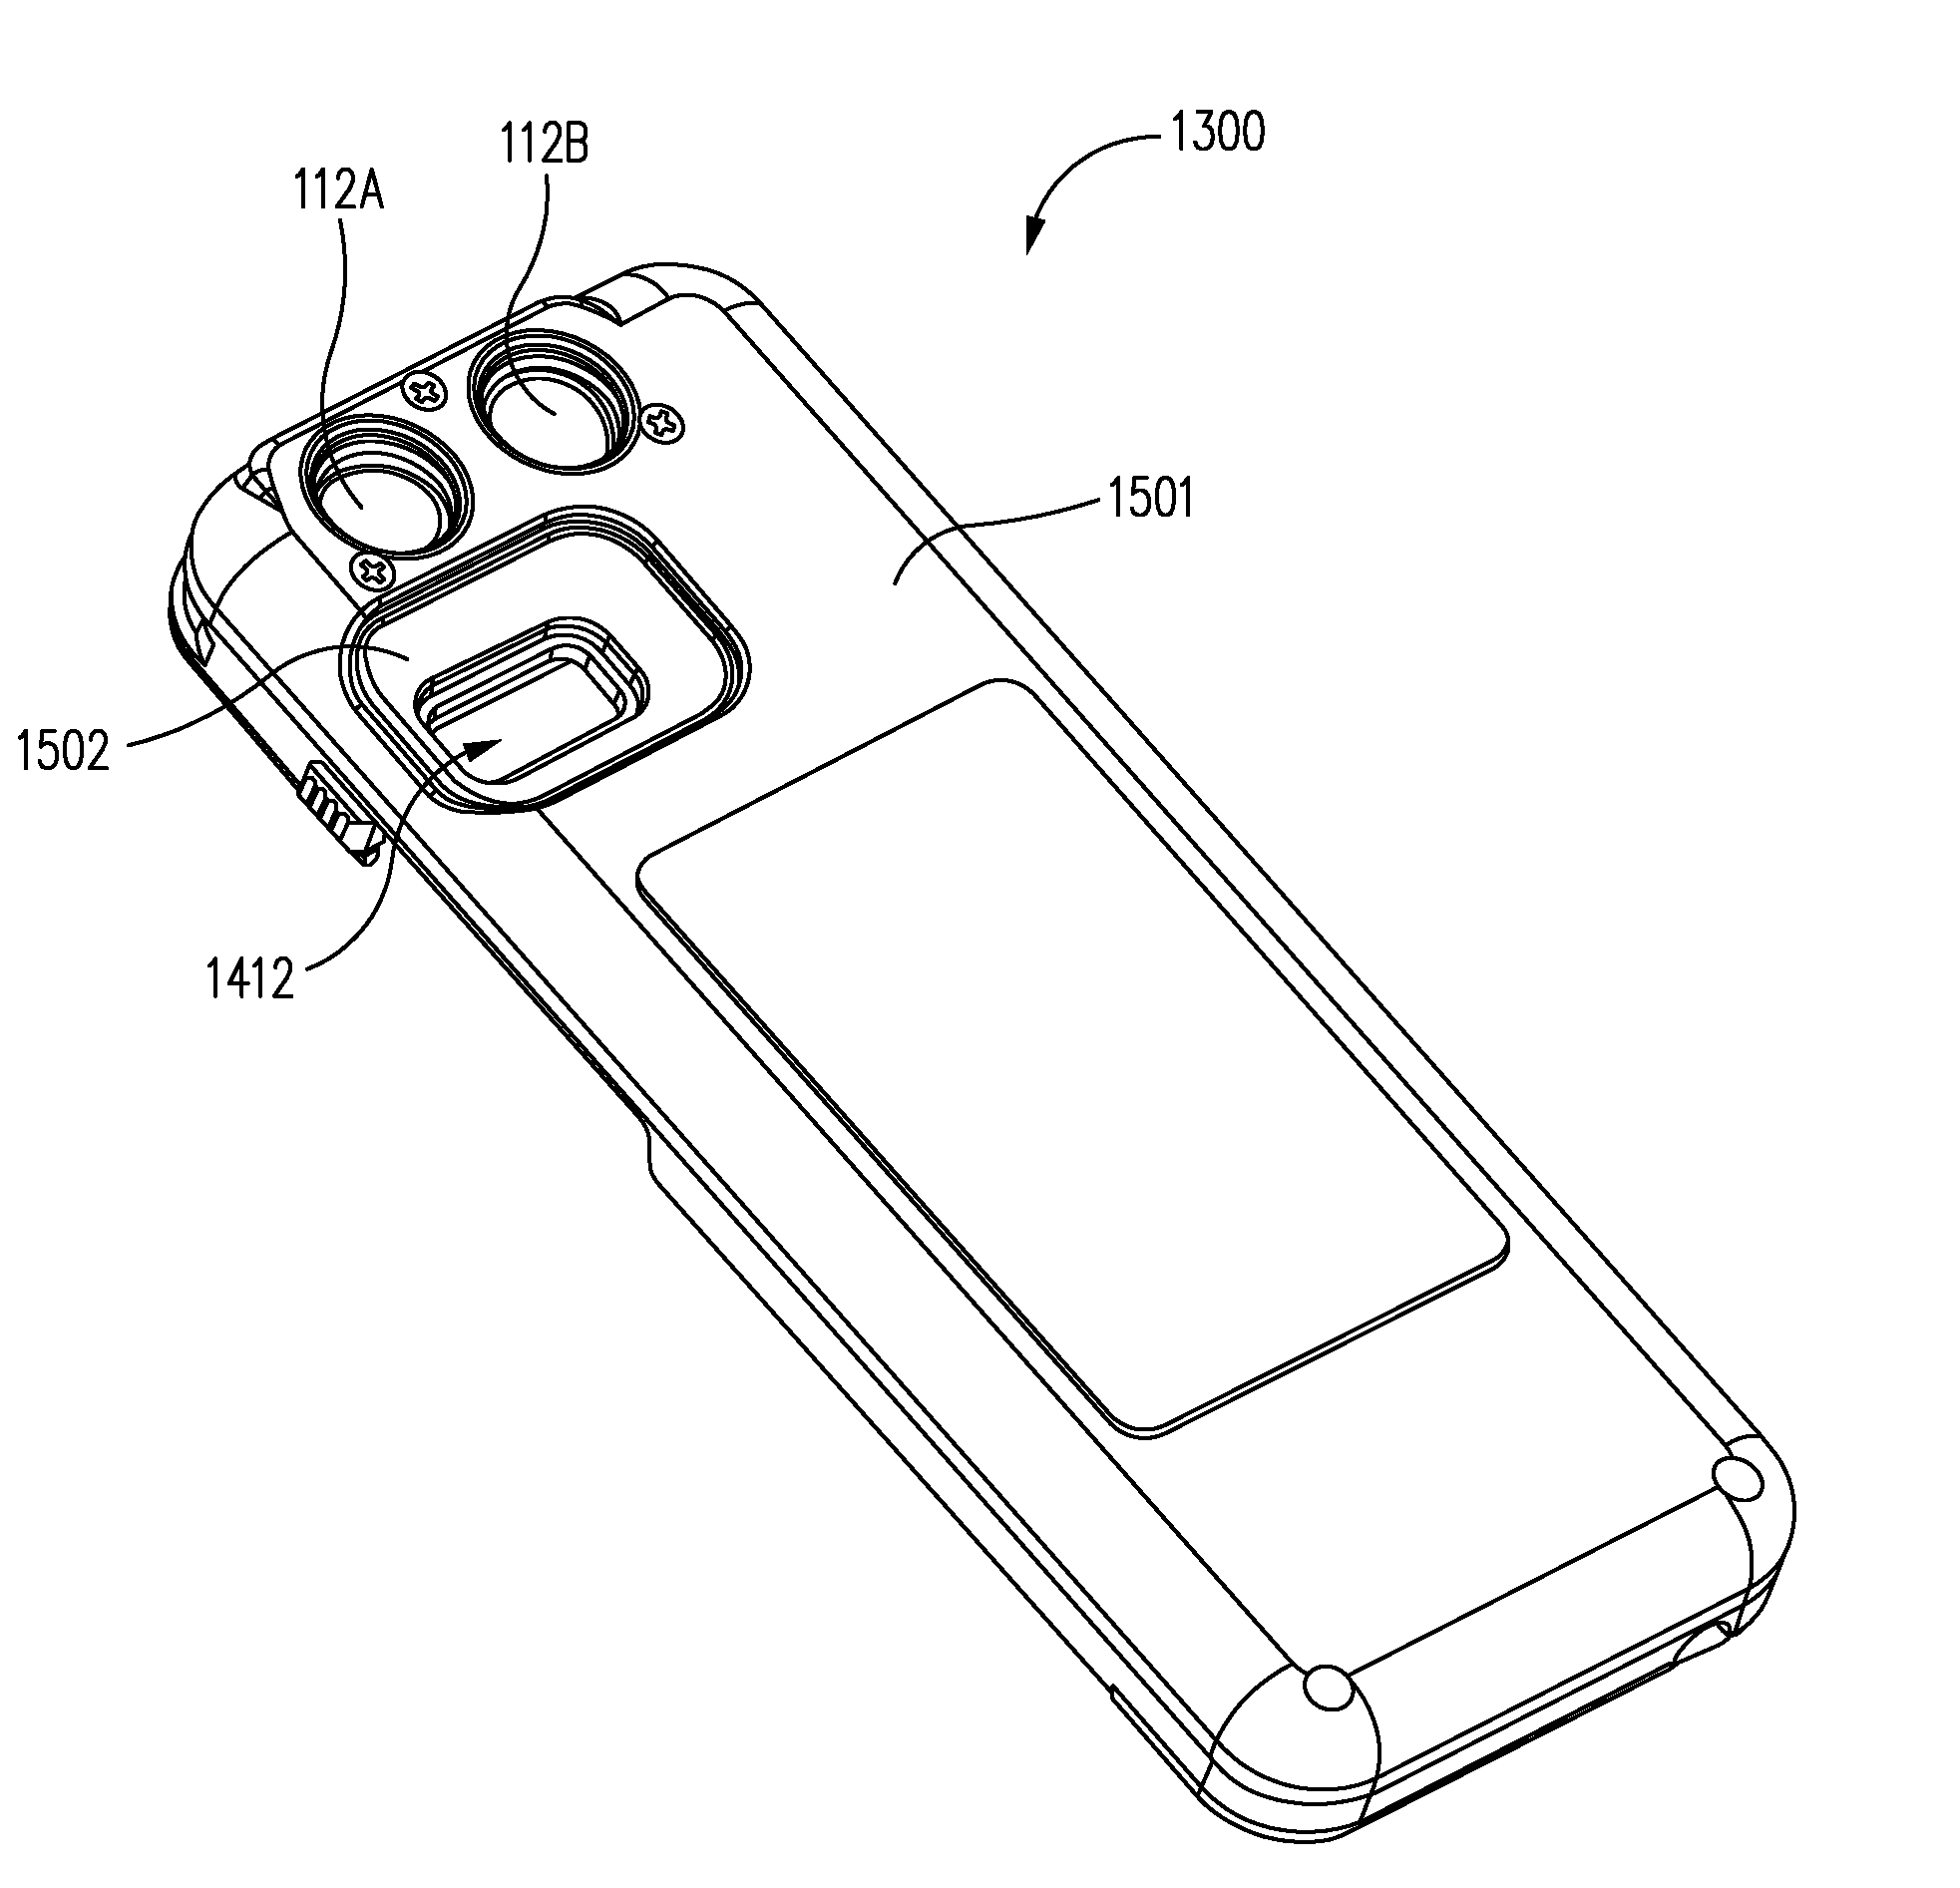 Lighting device attachment for mobile devices